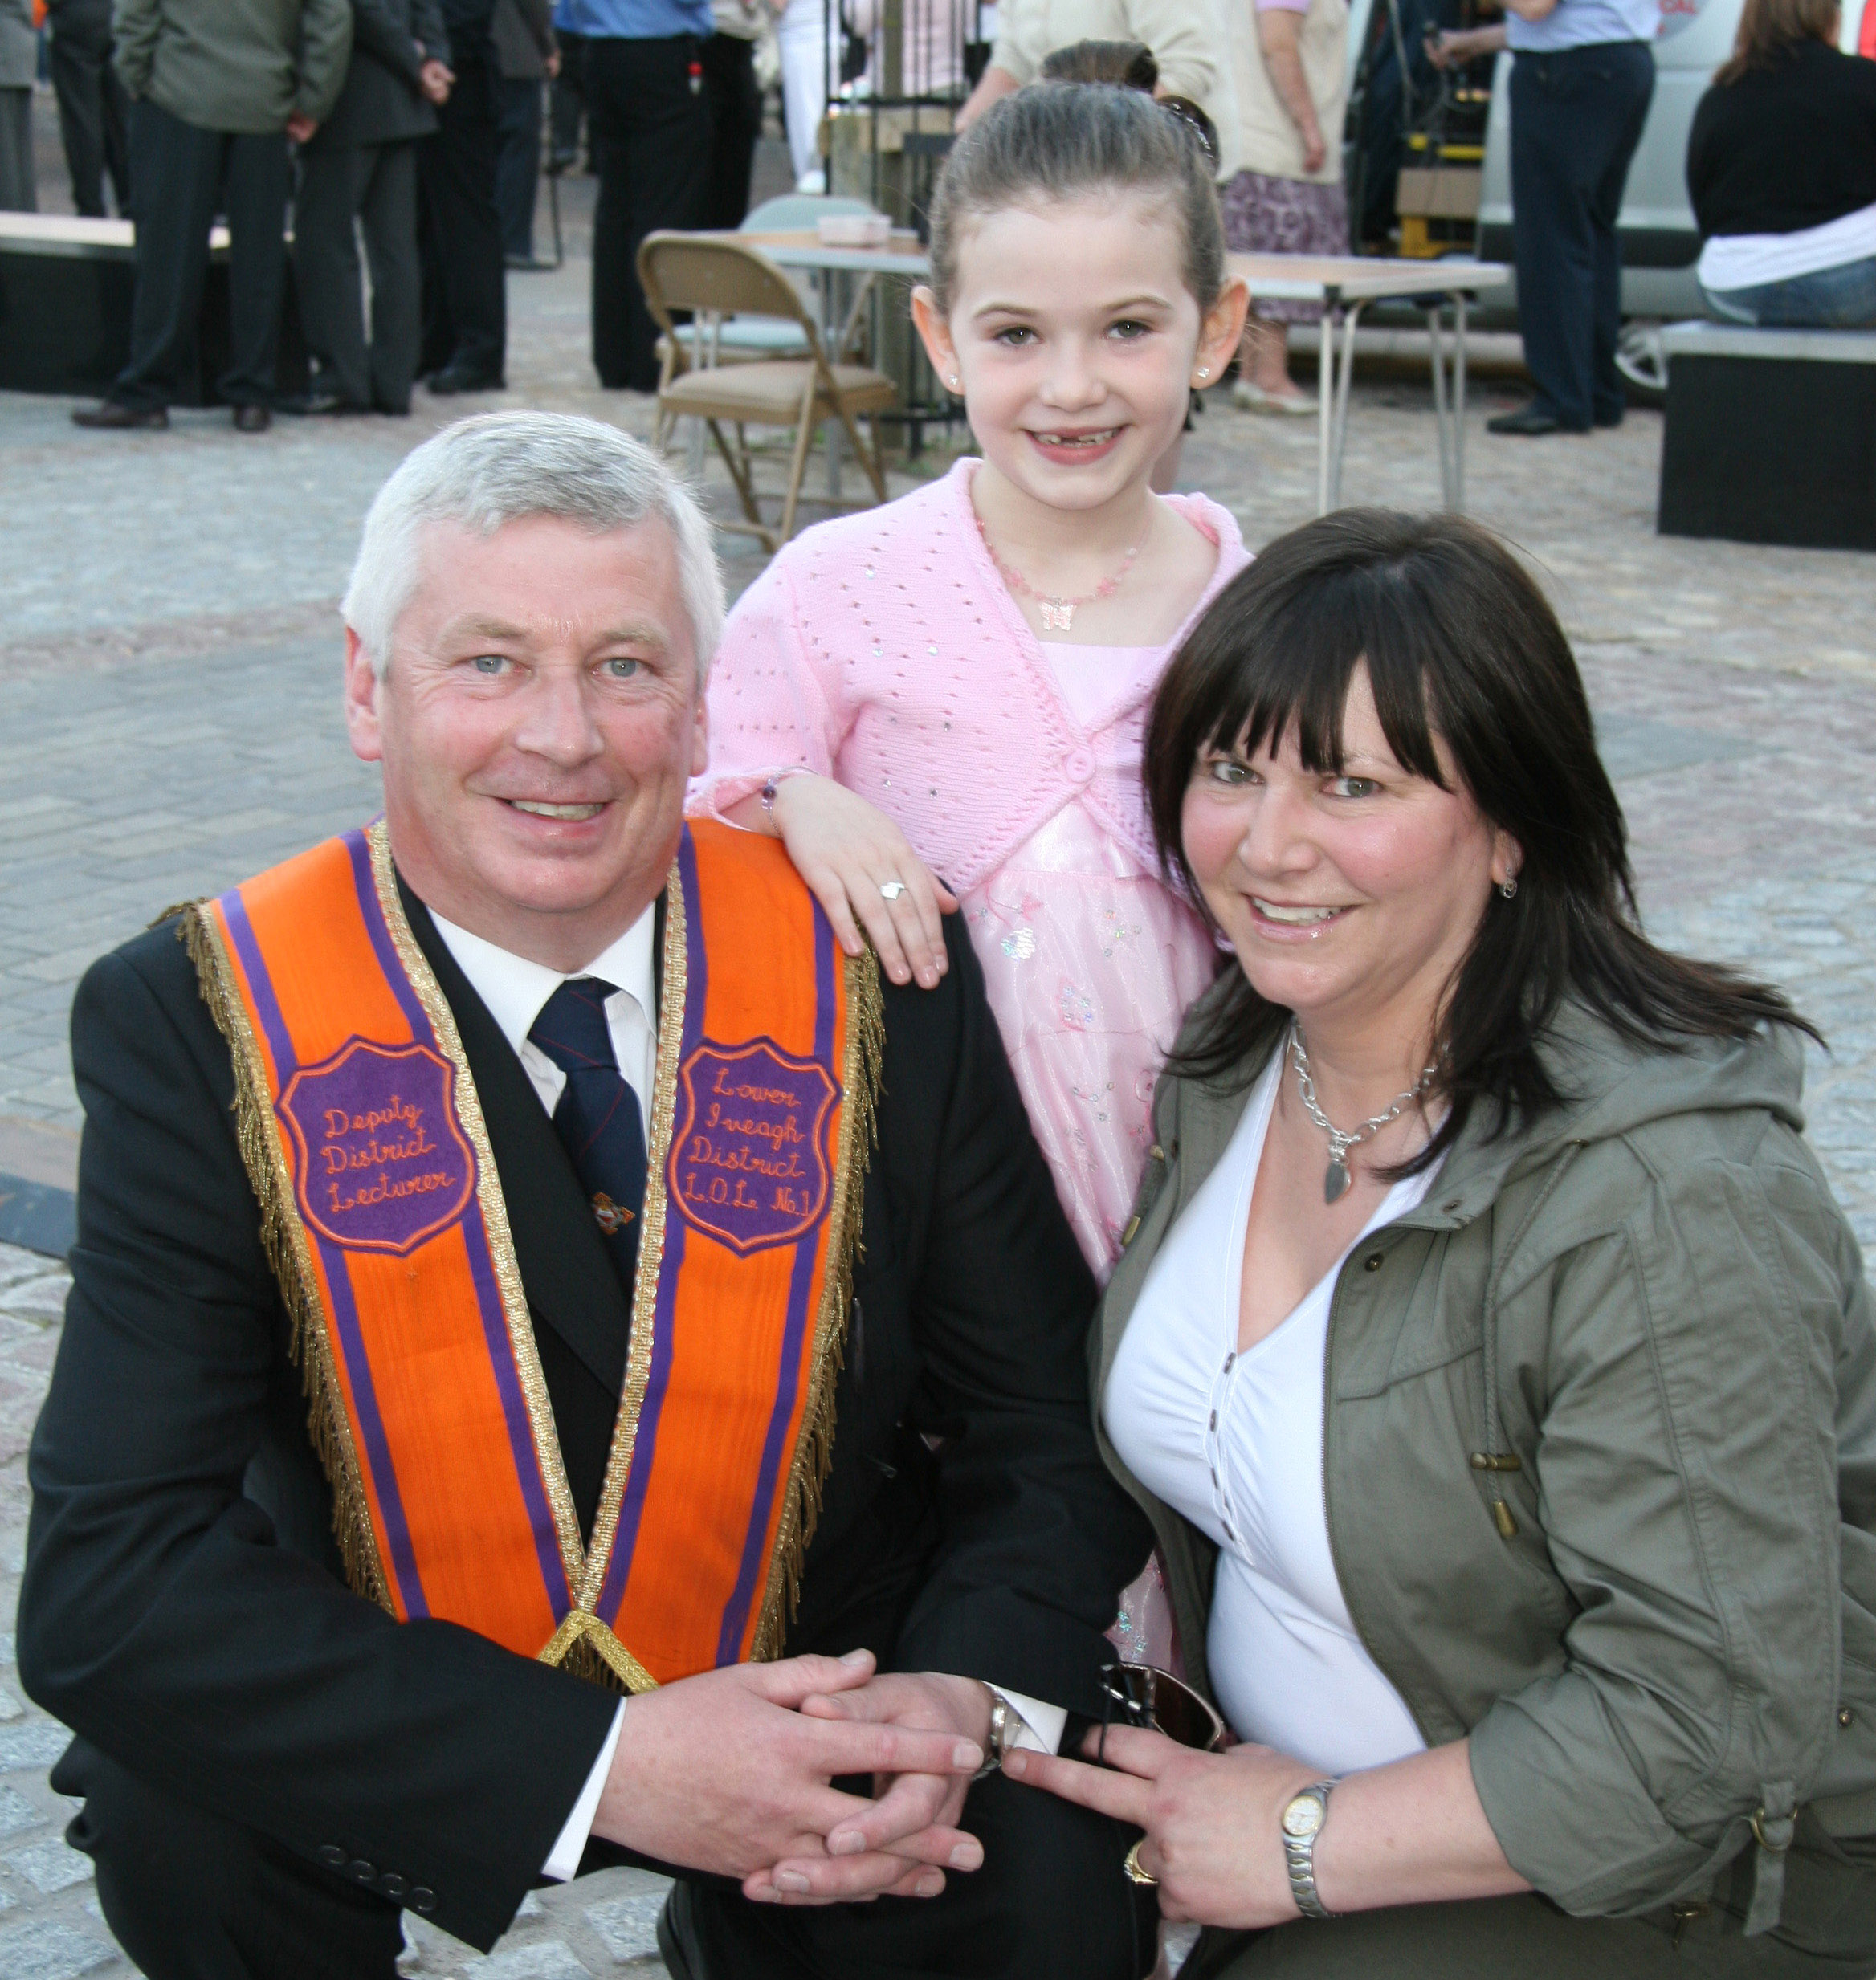 Dromara Primary School pupil, seven-year-old Victoria Kernaghan, who made a presentation to Mrs Mary Mattison at the opening the arch at Dromore on Wednesday 24th June, is pictured with her parents Mervyn and Linda. Second District Lecturer, Mervyn, is a member of Aughnaskeagh LOL No 1030.